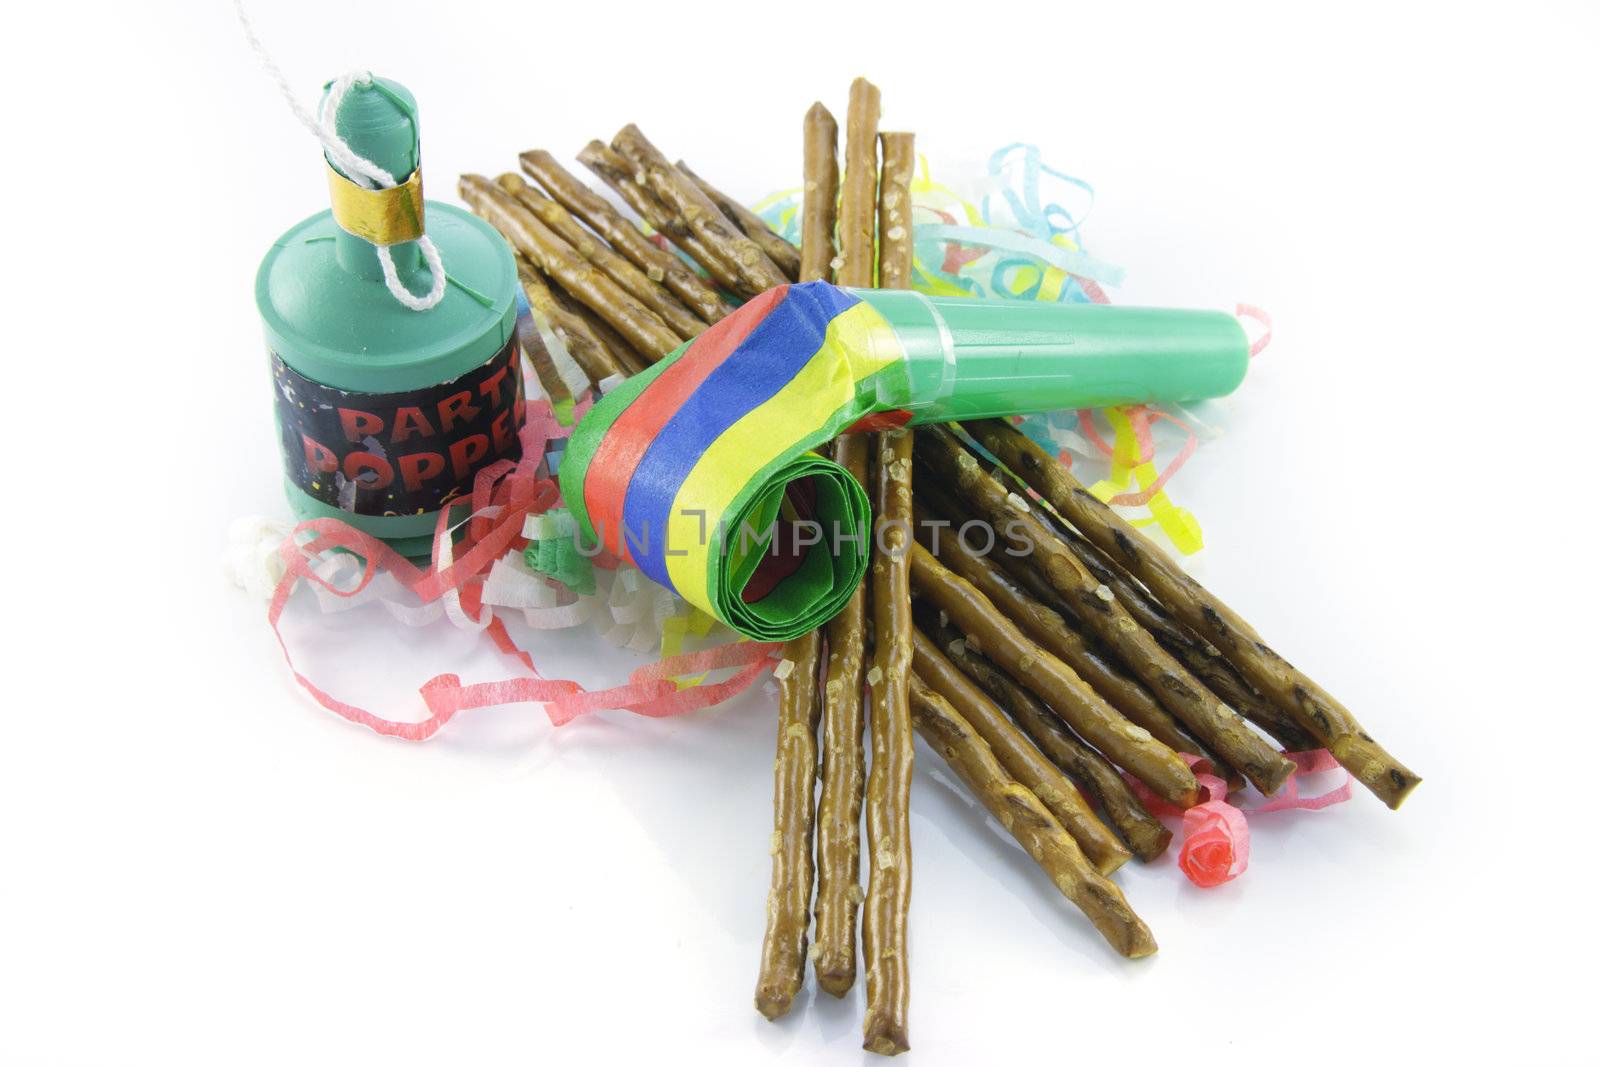 Salty brown tasty pretzels and party blower with party popper and streamers on a reflective white background